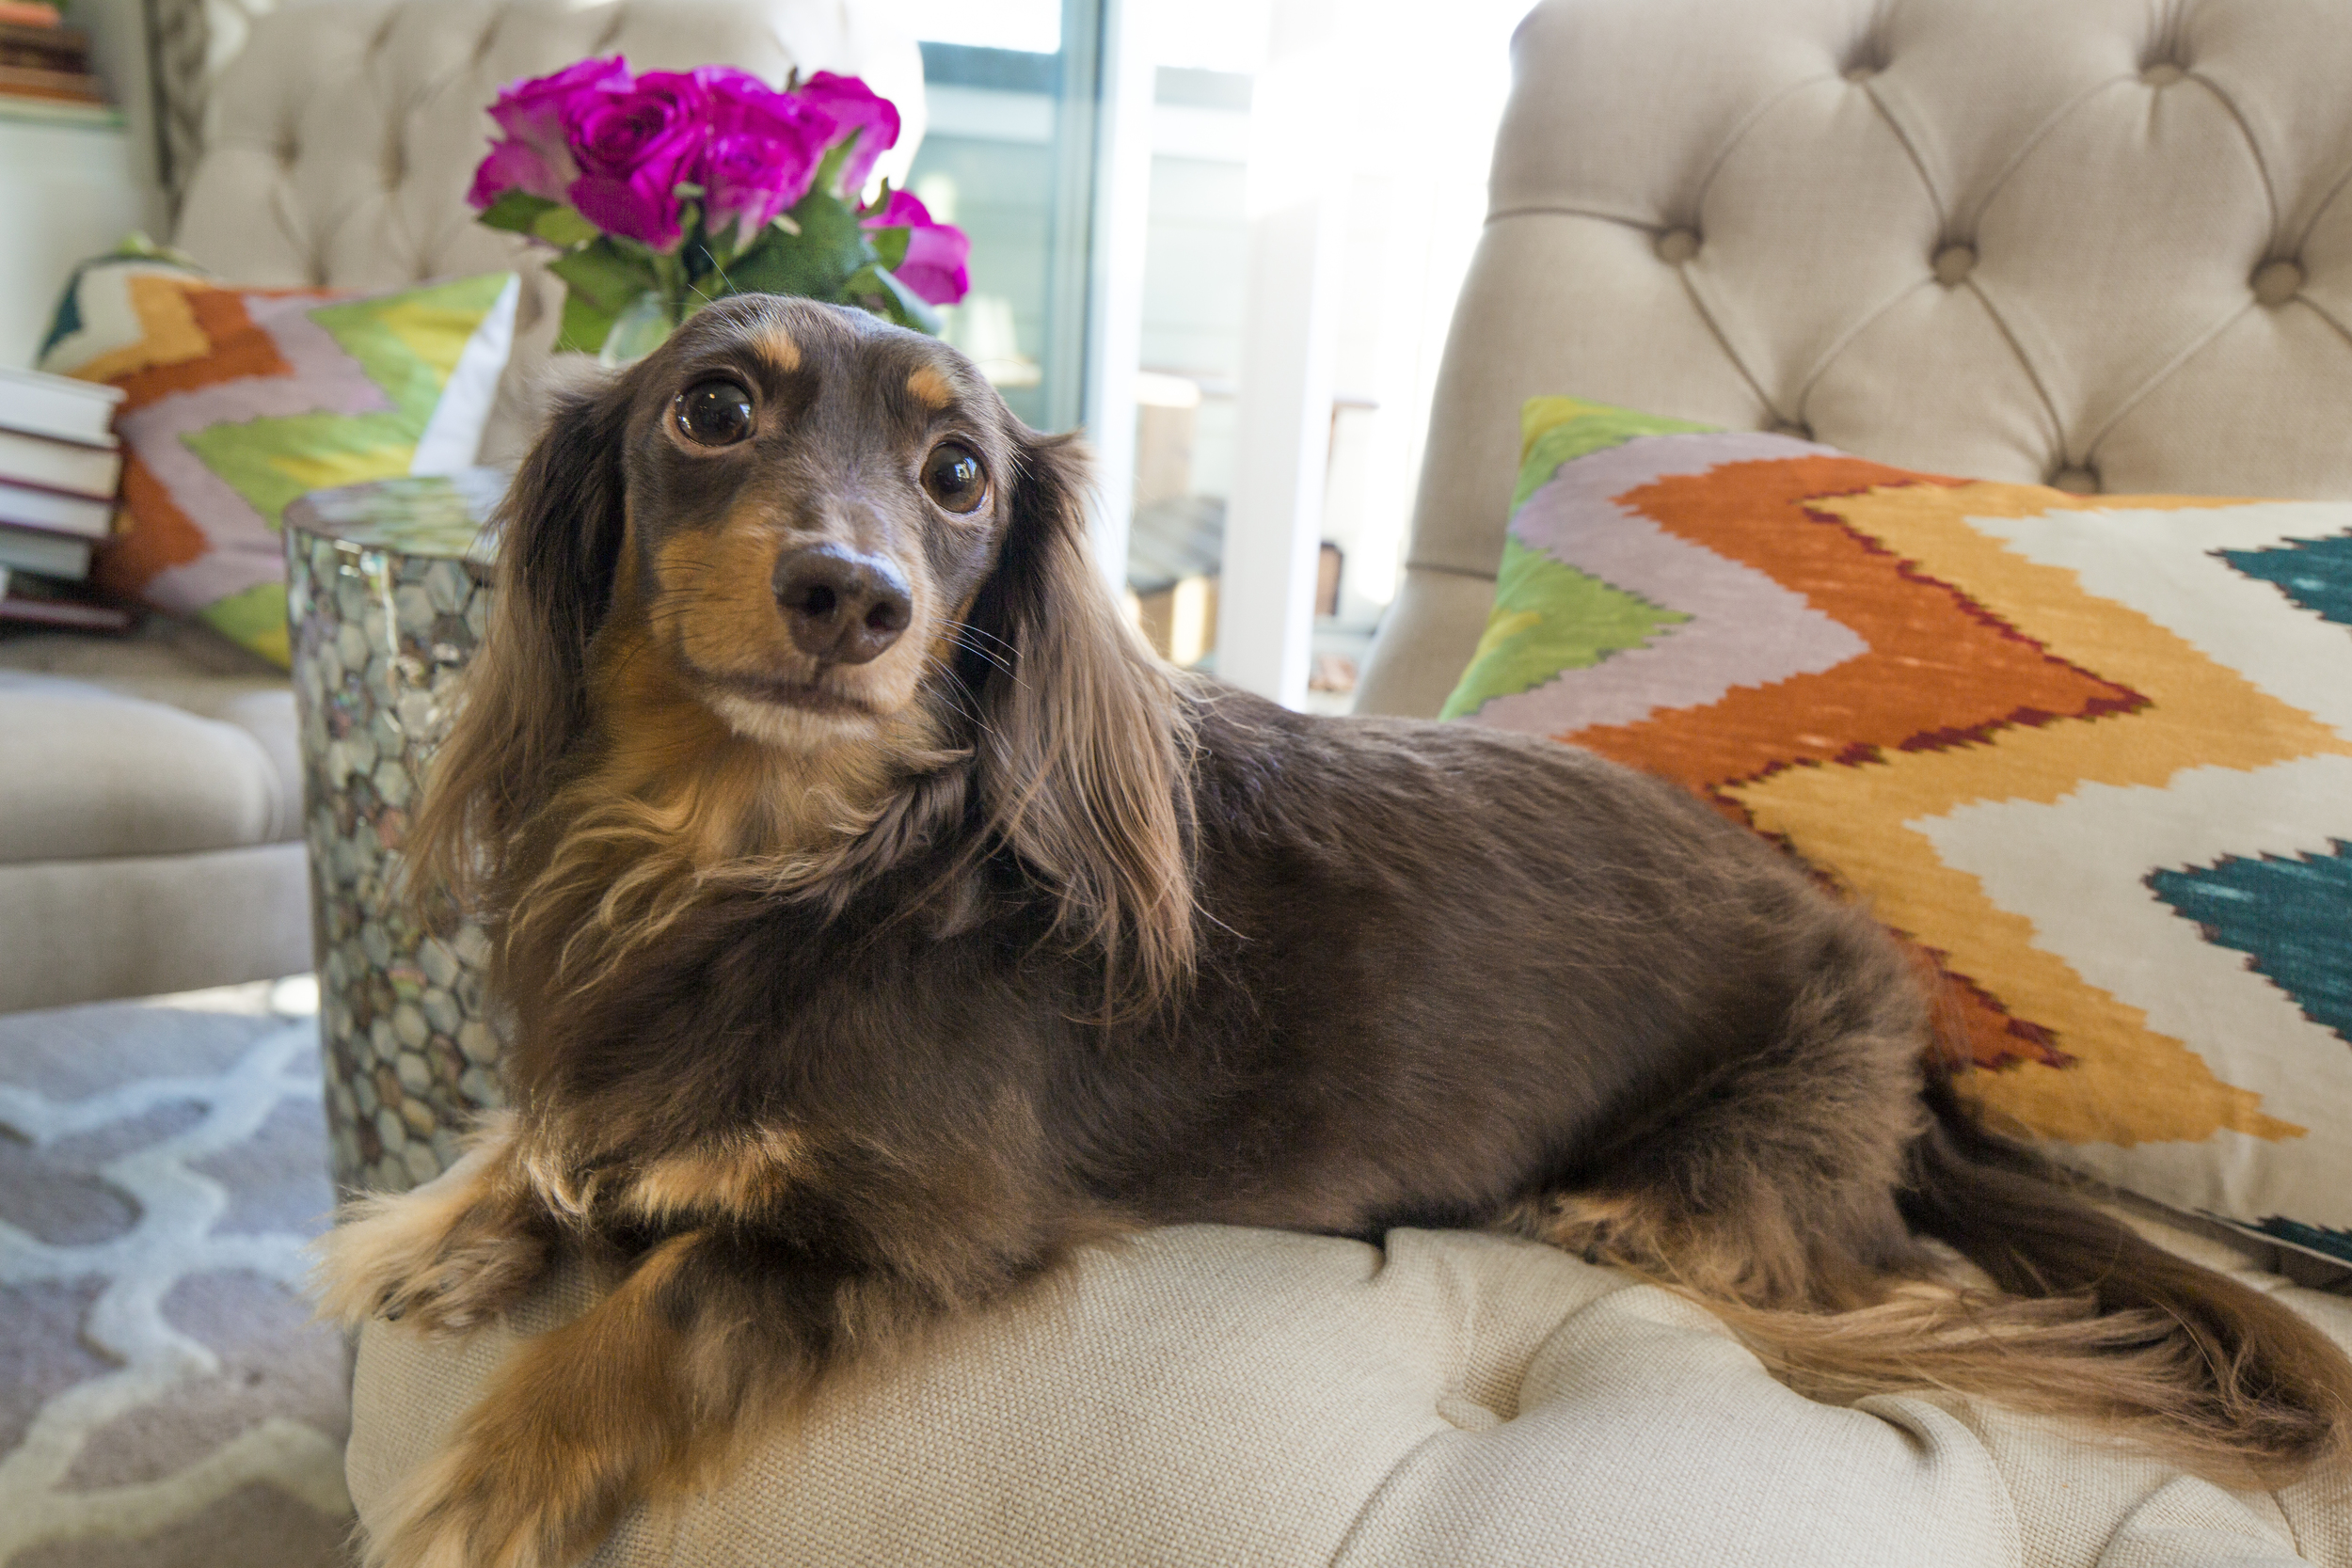 How perfect is our client's dog, Gilly?!